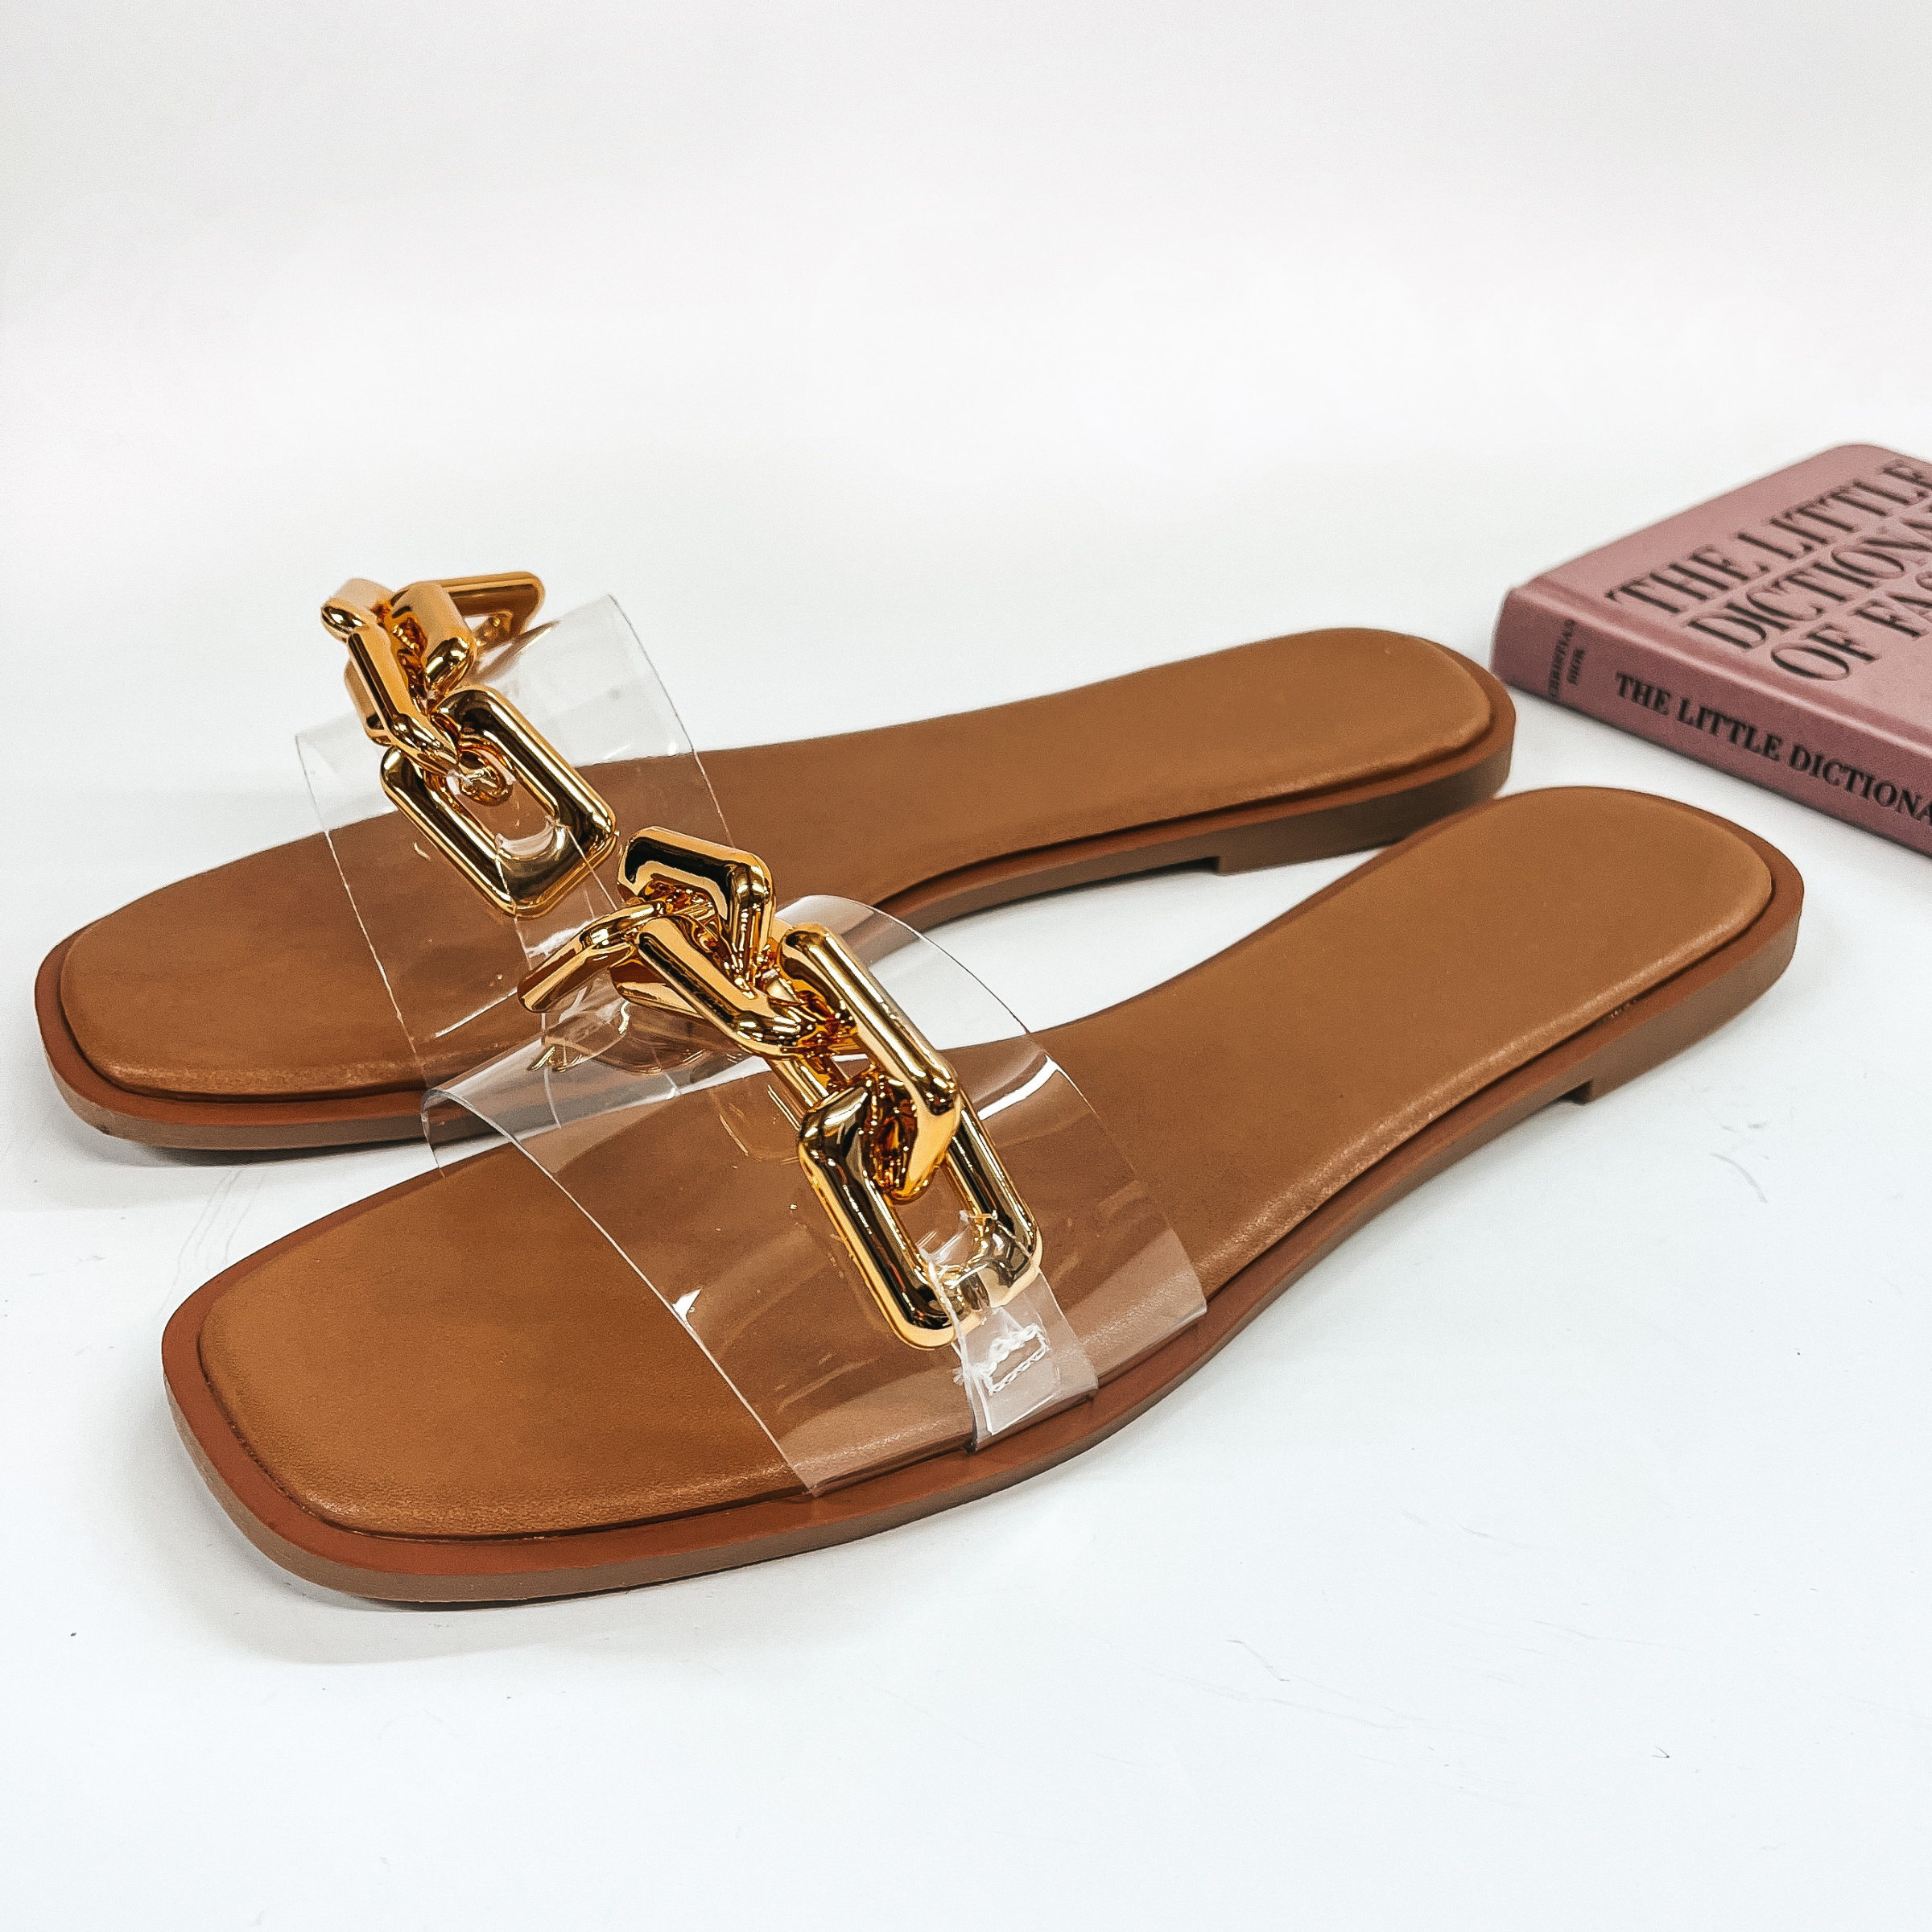 A pair of slide on flat sandals that have a clear strap with a gold chain on top. Pictured on white background with fashion book.